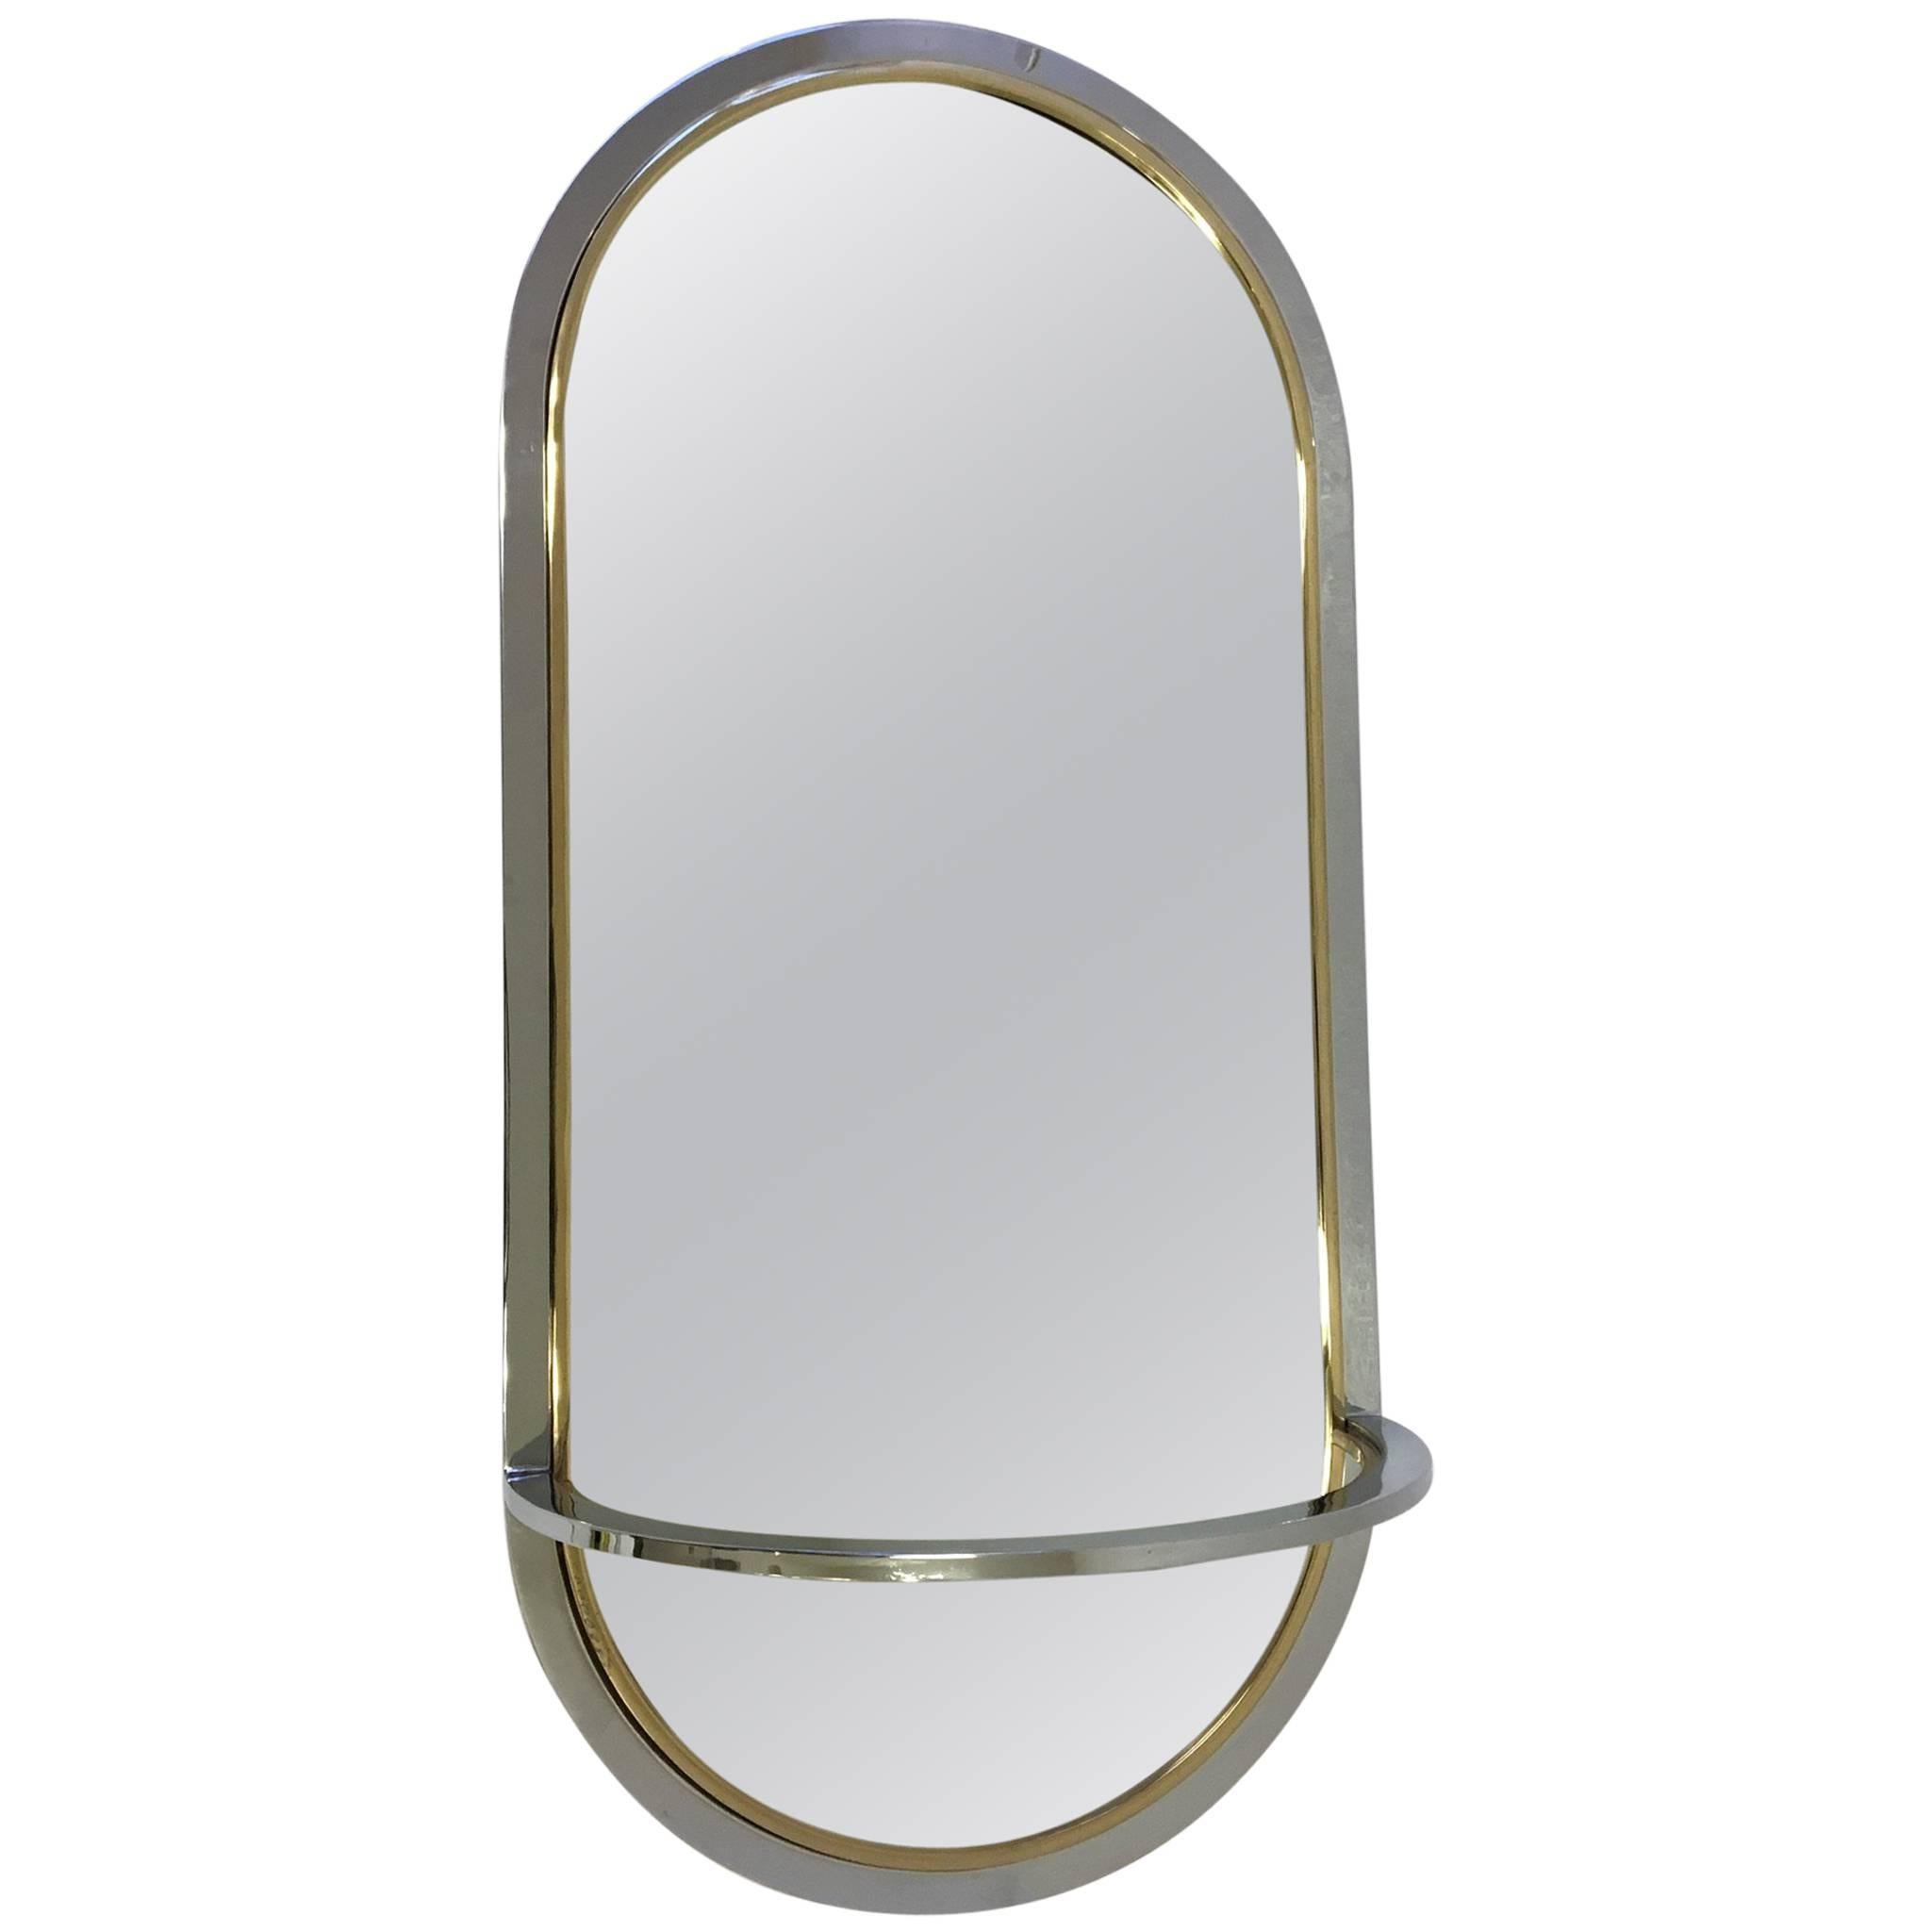 Chrome and Brass Wall Mirror by Milo Baughman for DIA